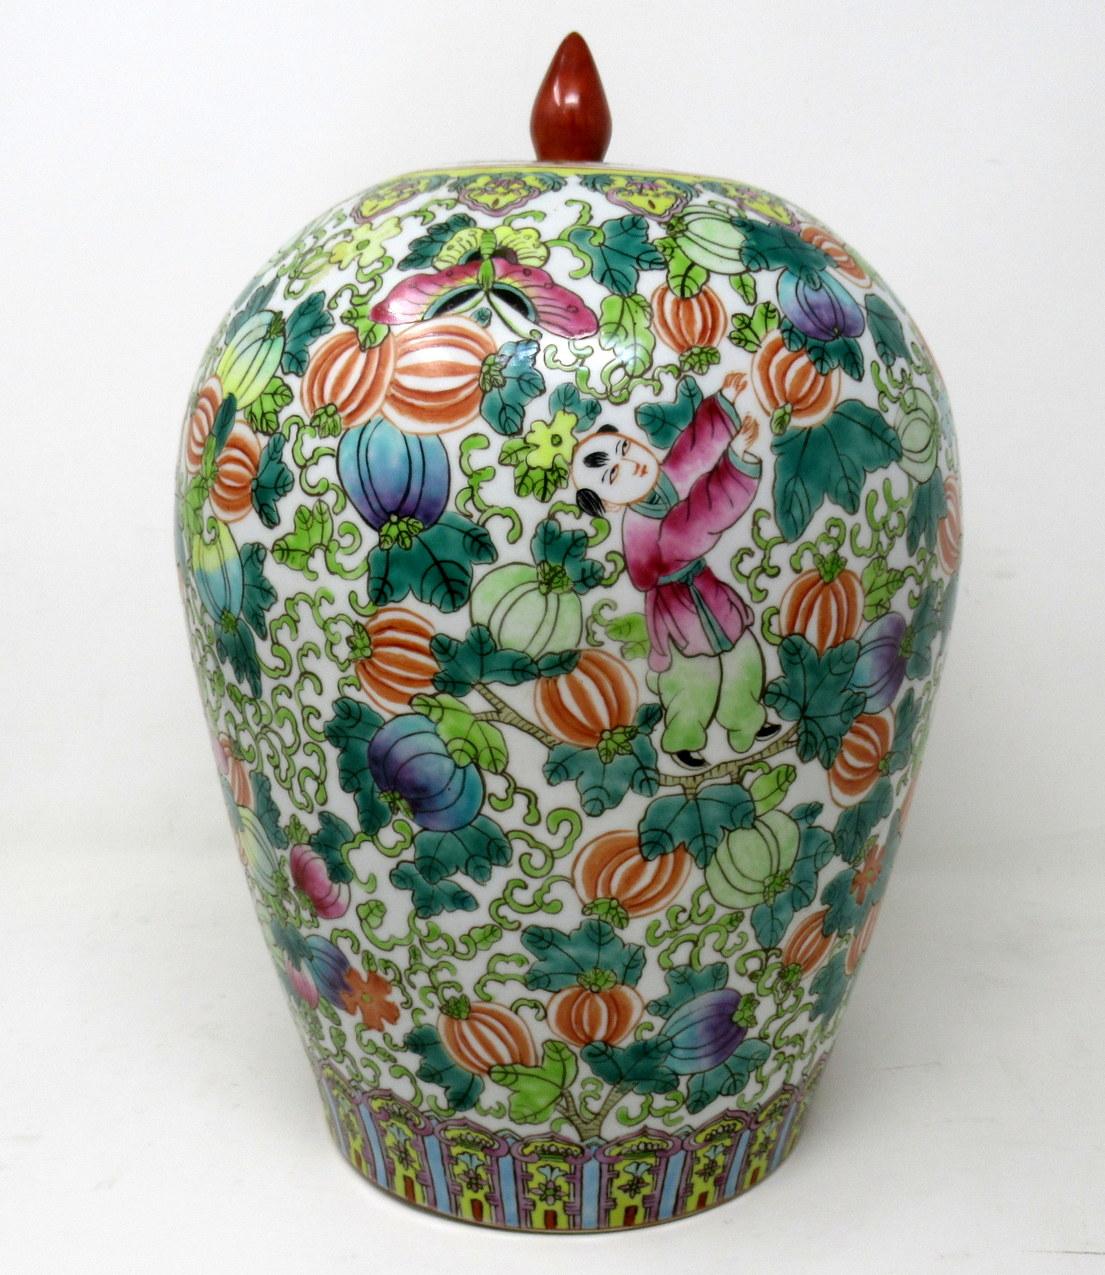 A superb example of a Chinese porcelain ginger jar or centerpiece of generous proportions, complete with its original cover with plain lobed finial. Late nineteenth, early twentieth century, Chinese Republic period. 

Of Melon-shaped outline,